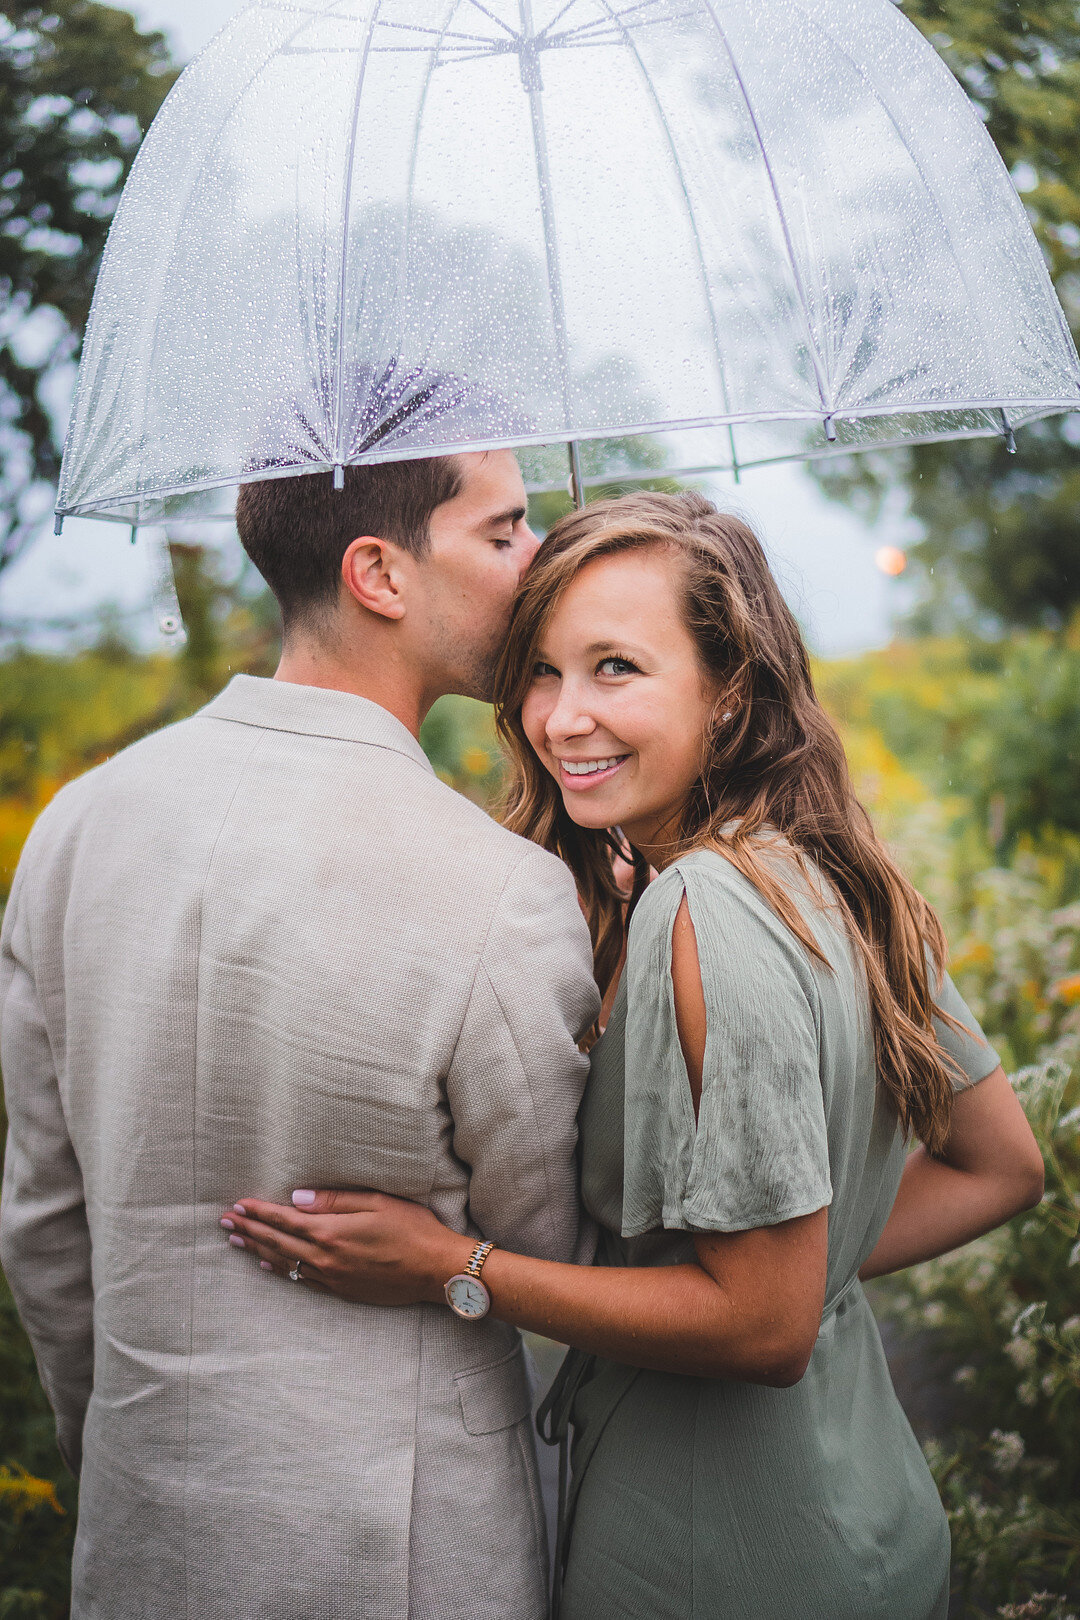 Gorgeous Rainy Day Engagement Session in the City captured by Maura Black Photography